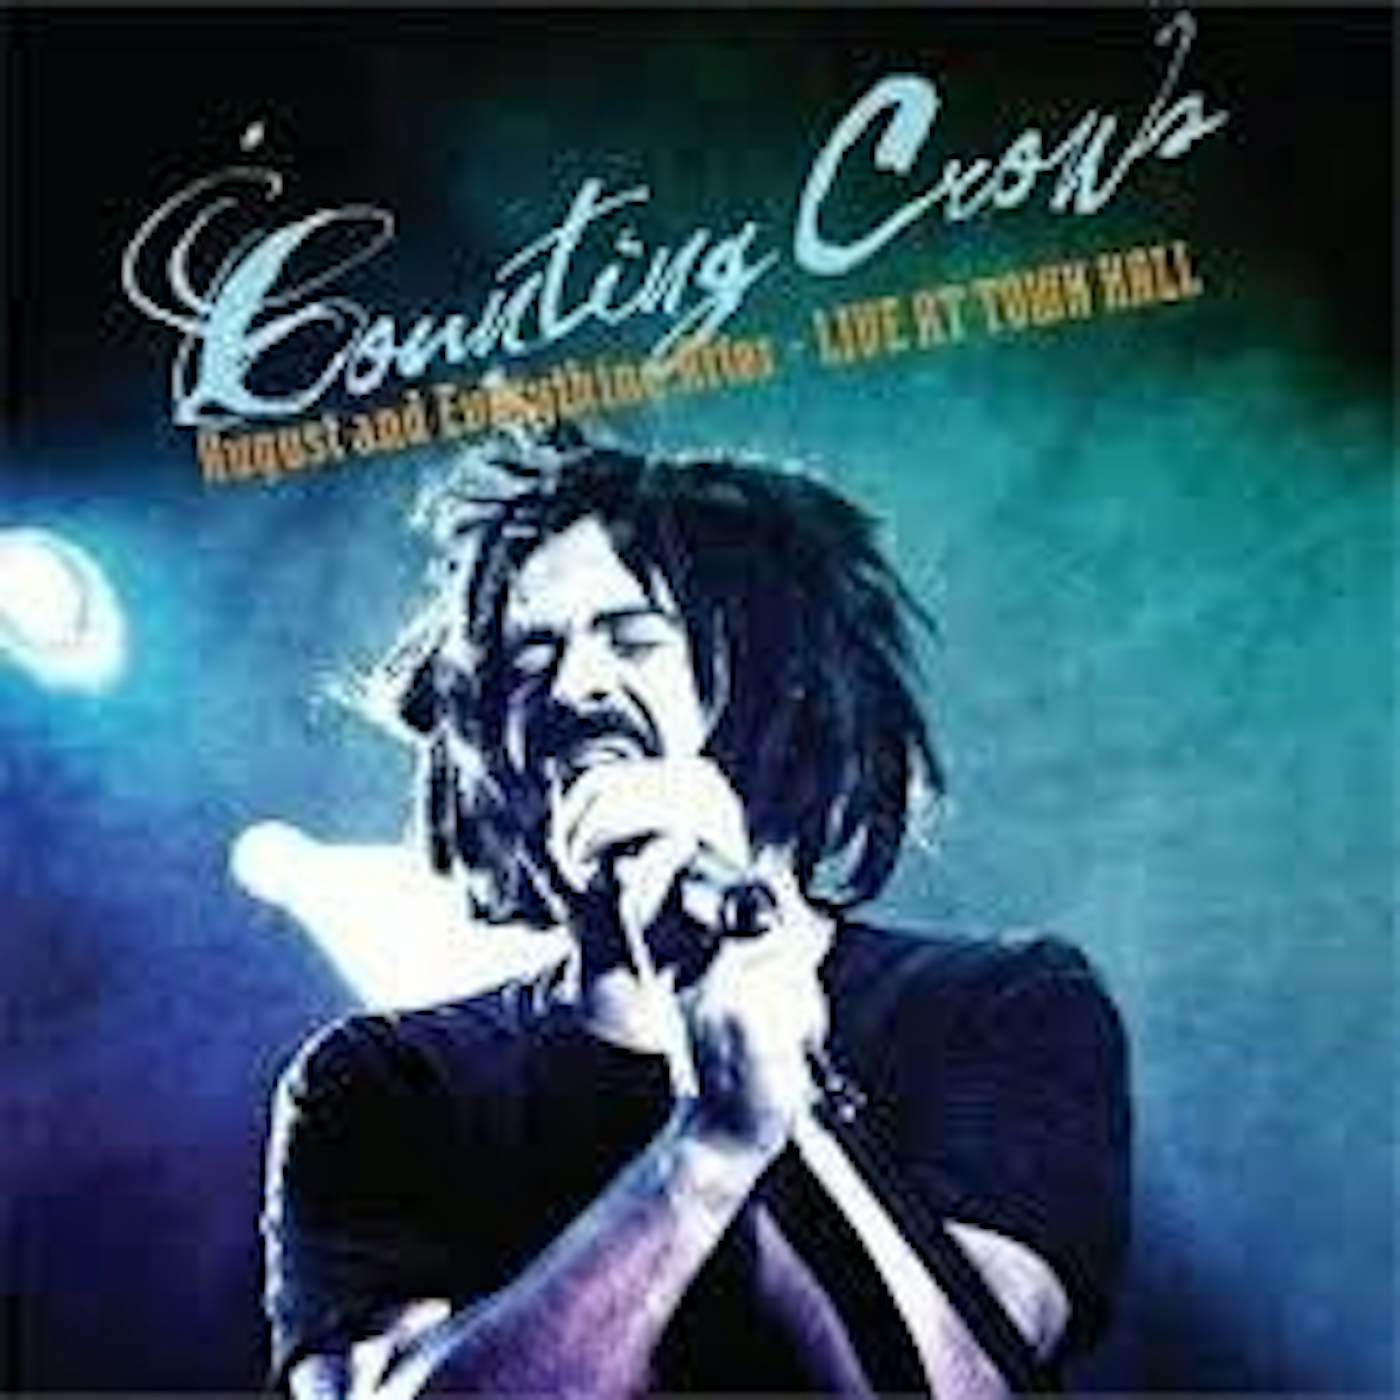 Counting Crows AUGUST AND EVERYTHING AFTER - LIVE AT TOWN HALL CD